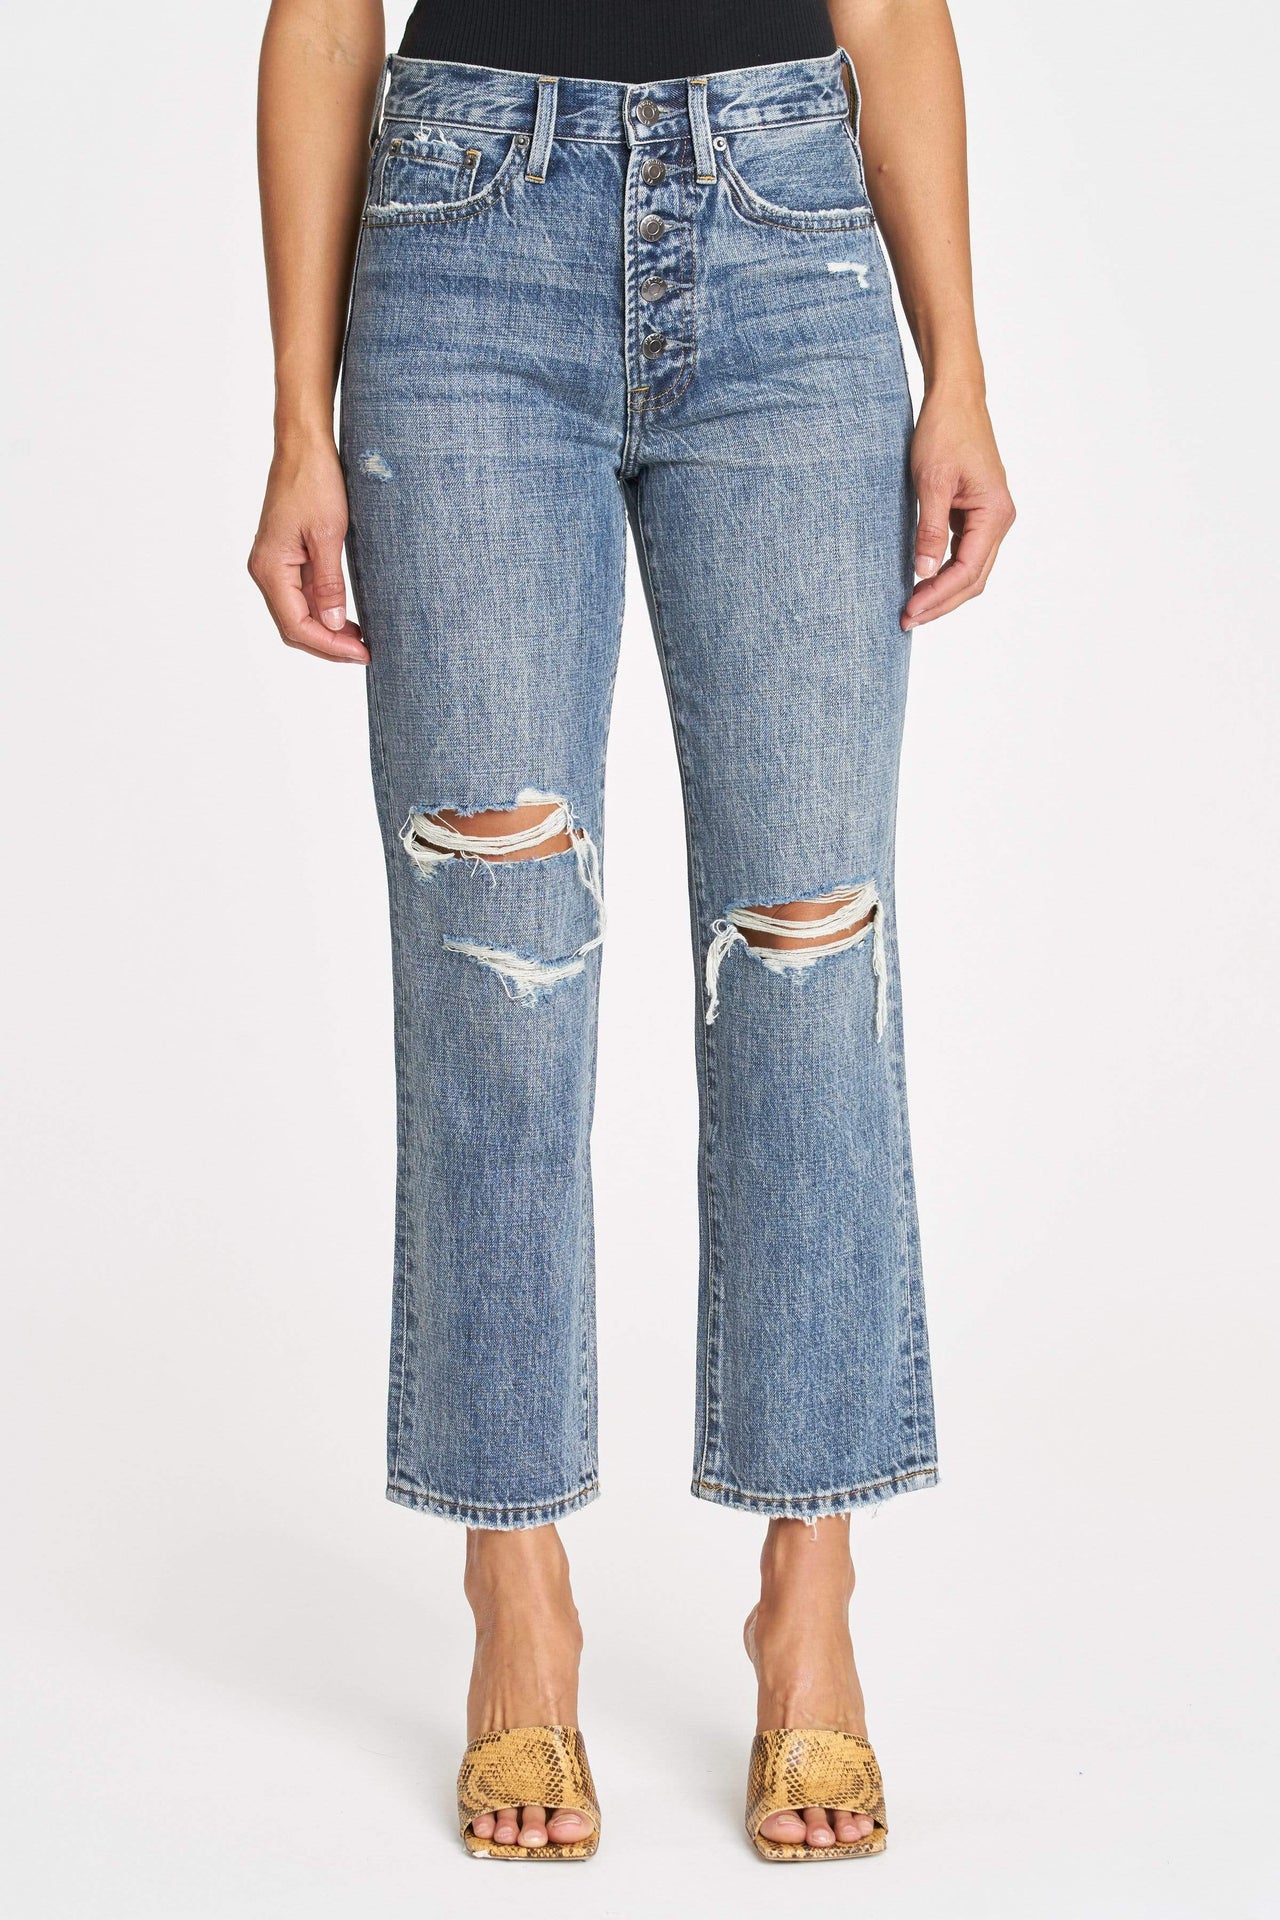 Charlie Pulse Exposed Button Fly Destructed High Rise Straight Leg, Denim by Pistola | LIT Boutique